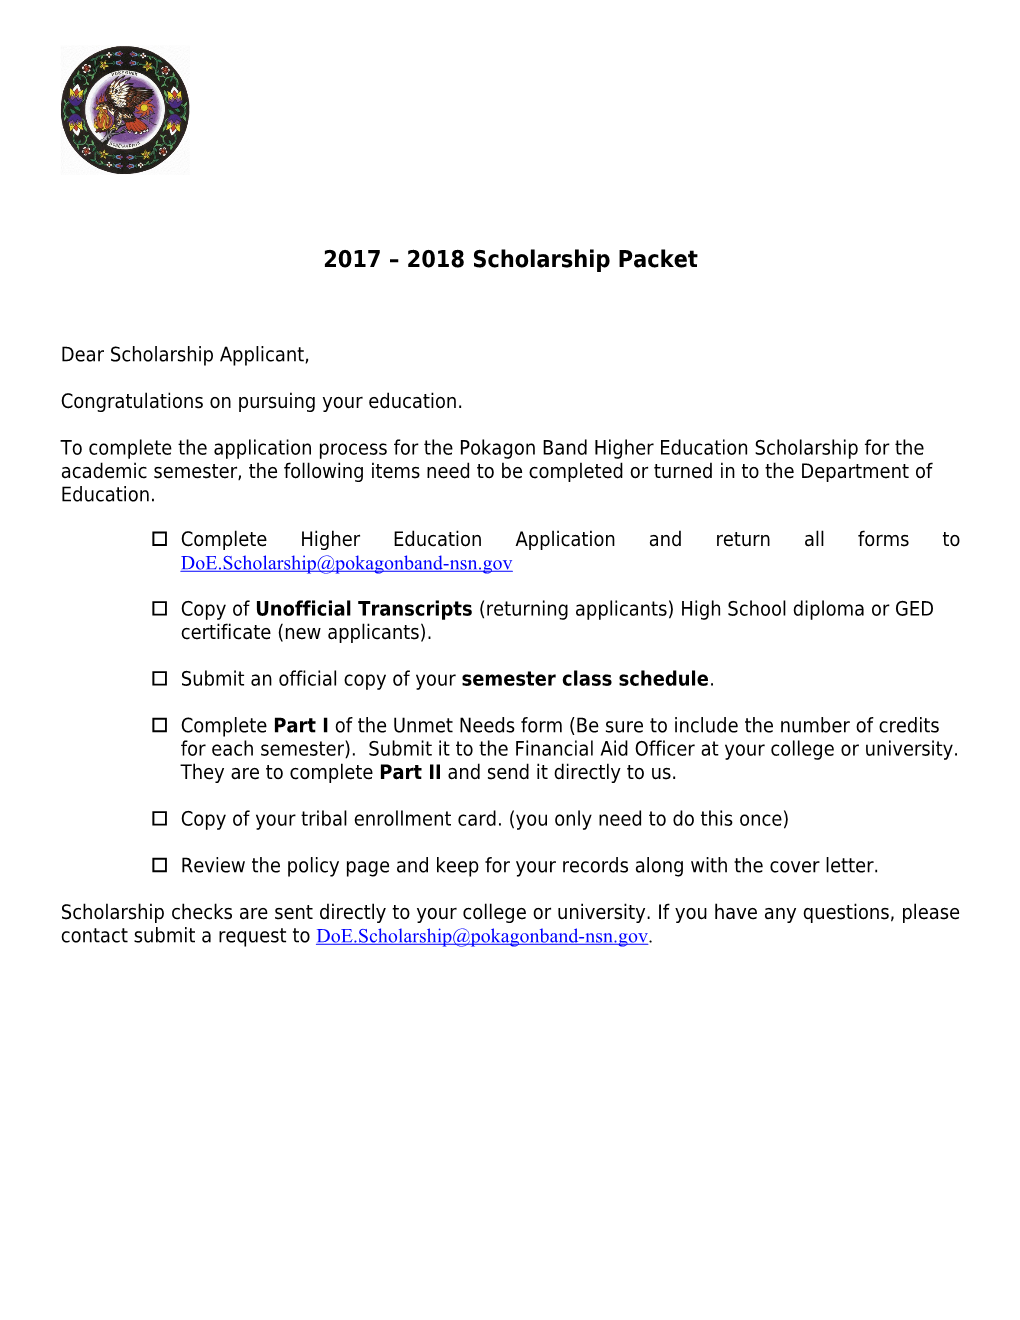 2017 2018 Scholarship Packet s1